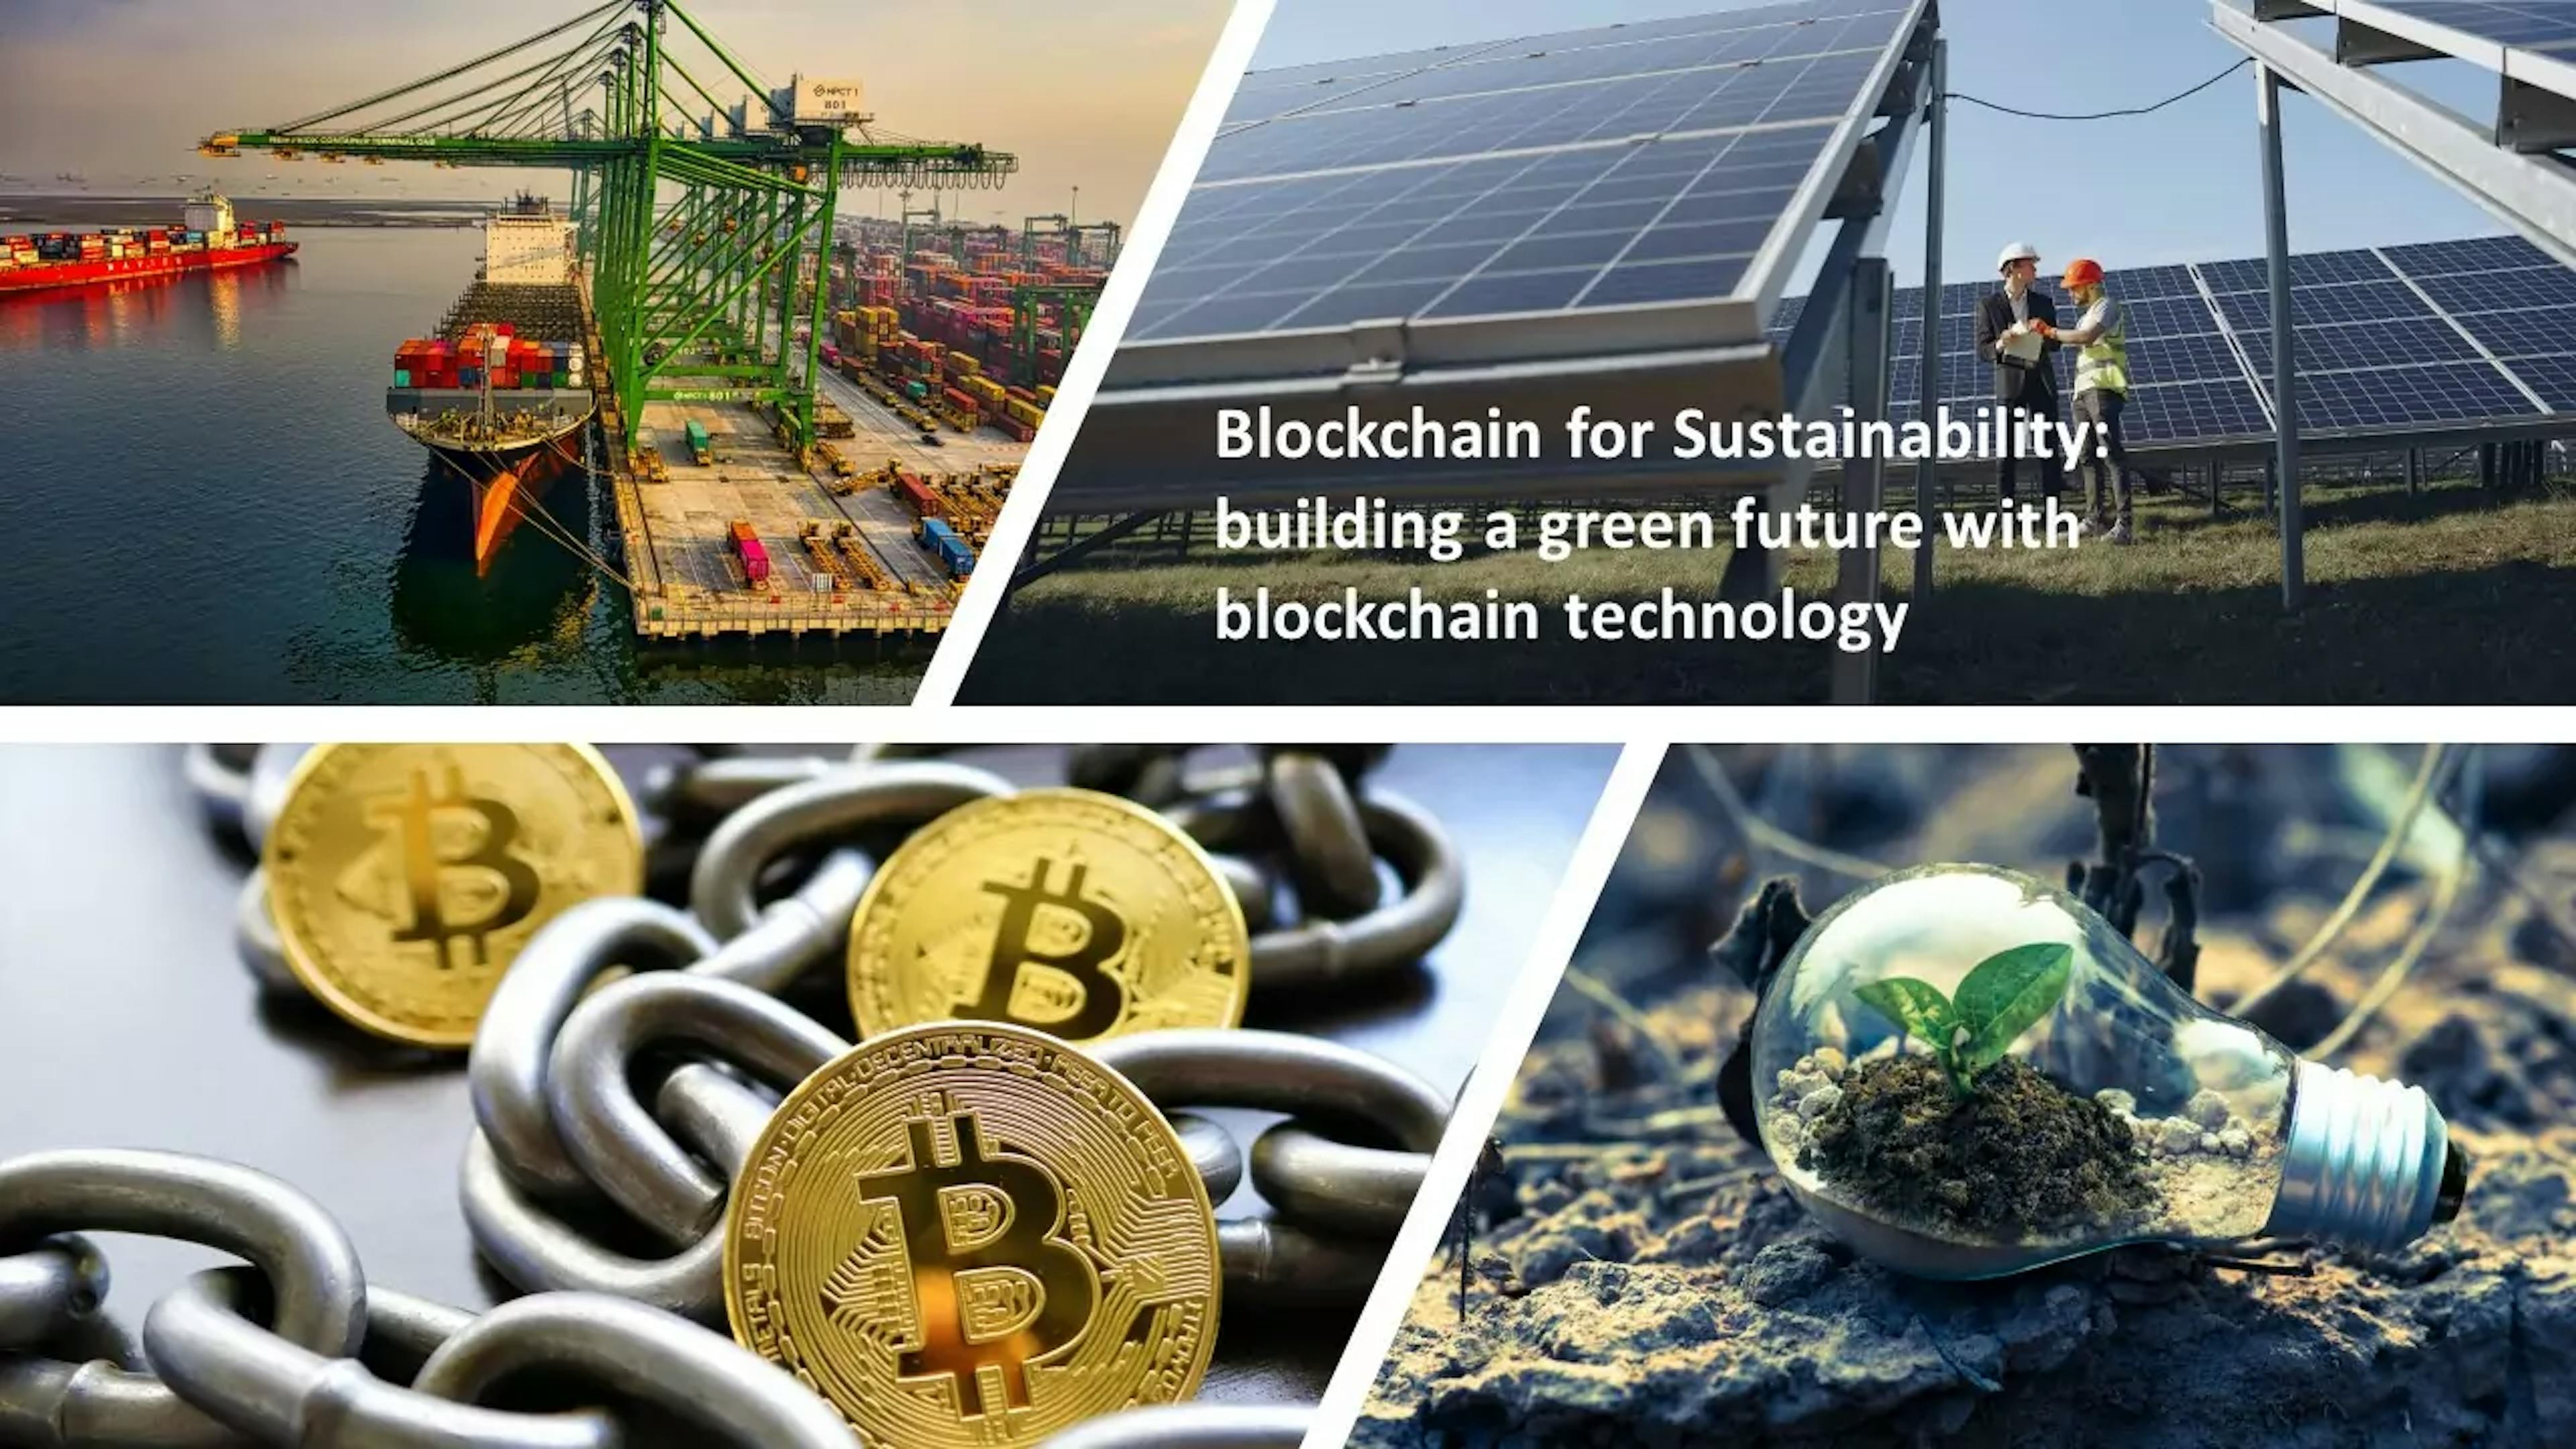 Blockchain technology has potential for sustainability